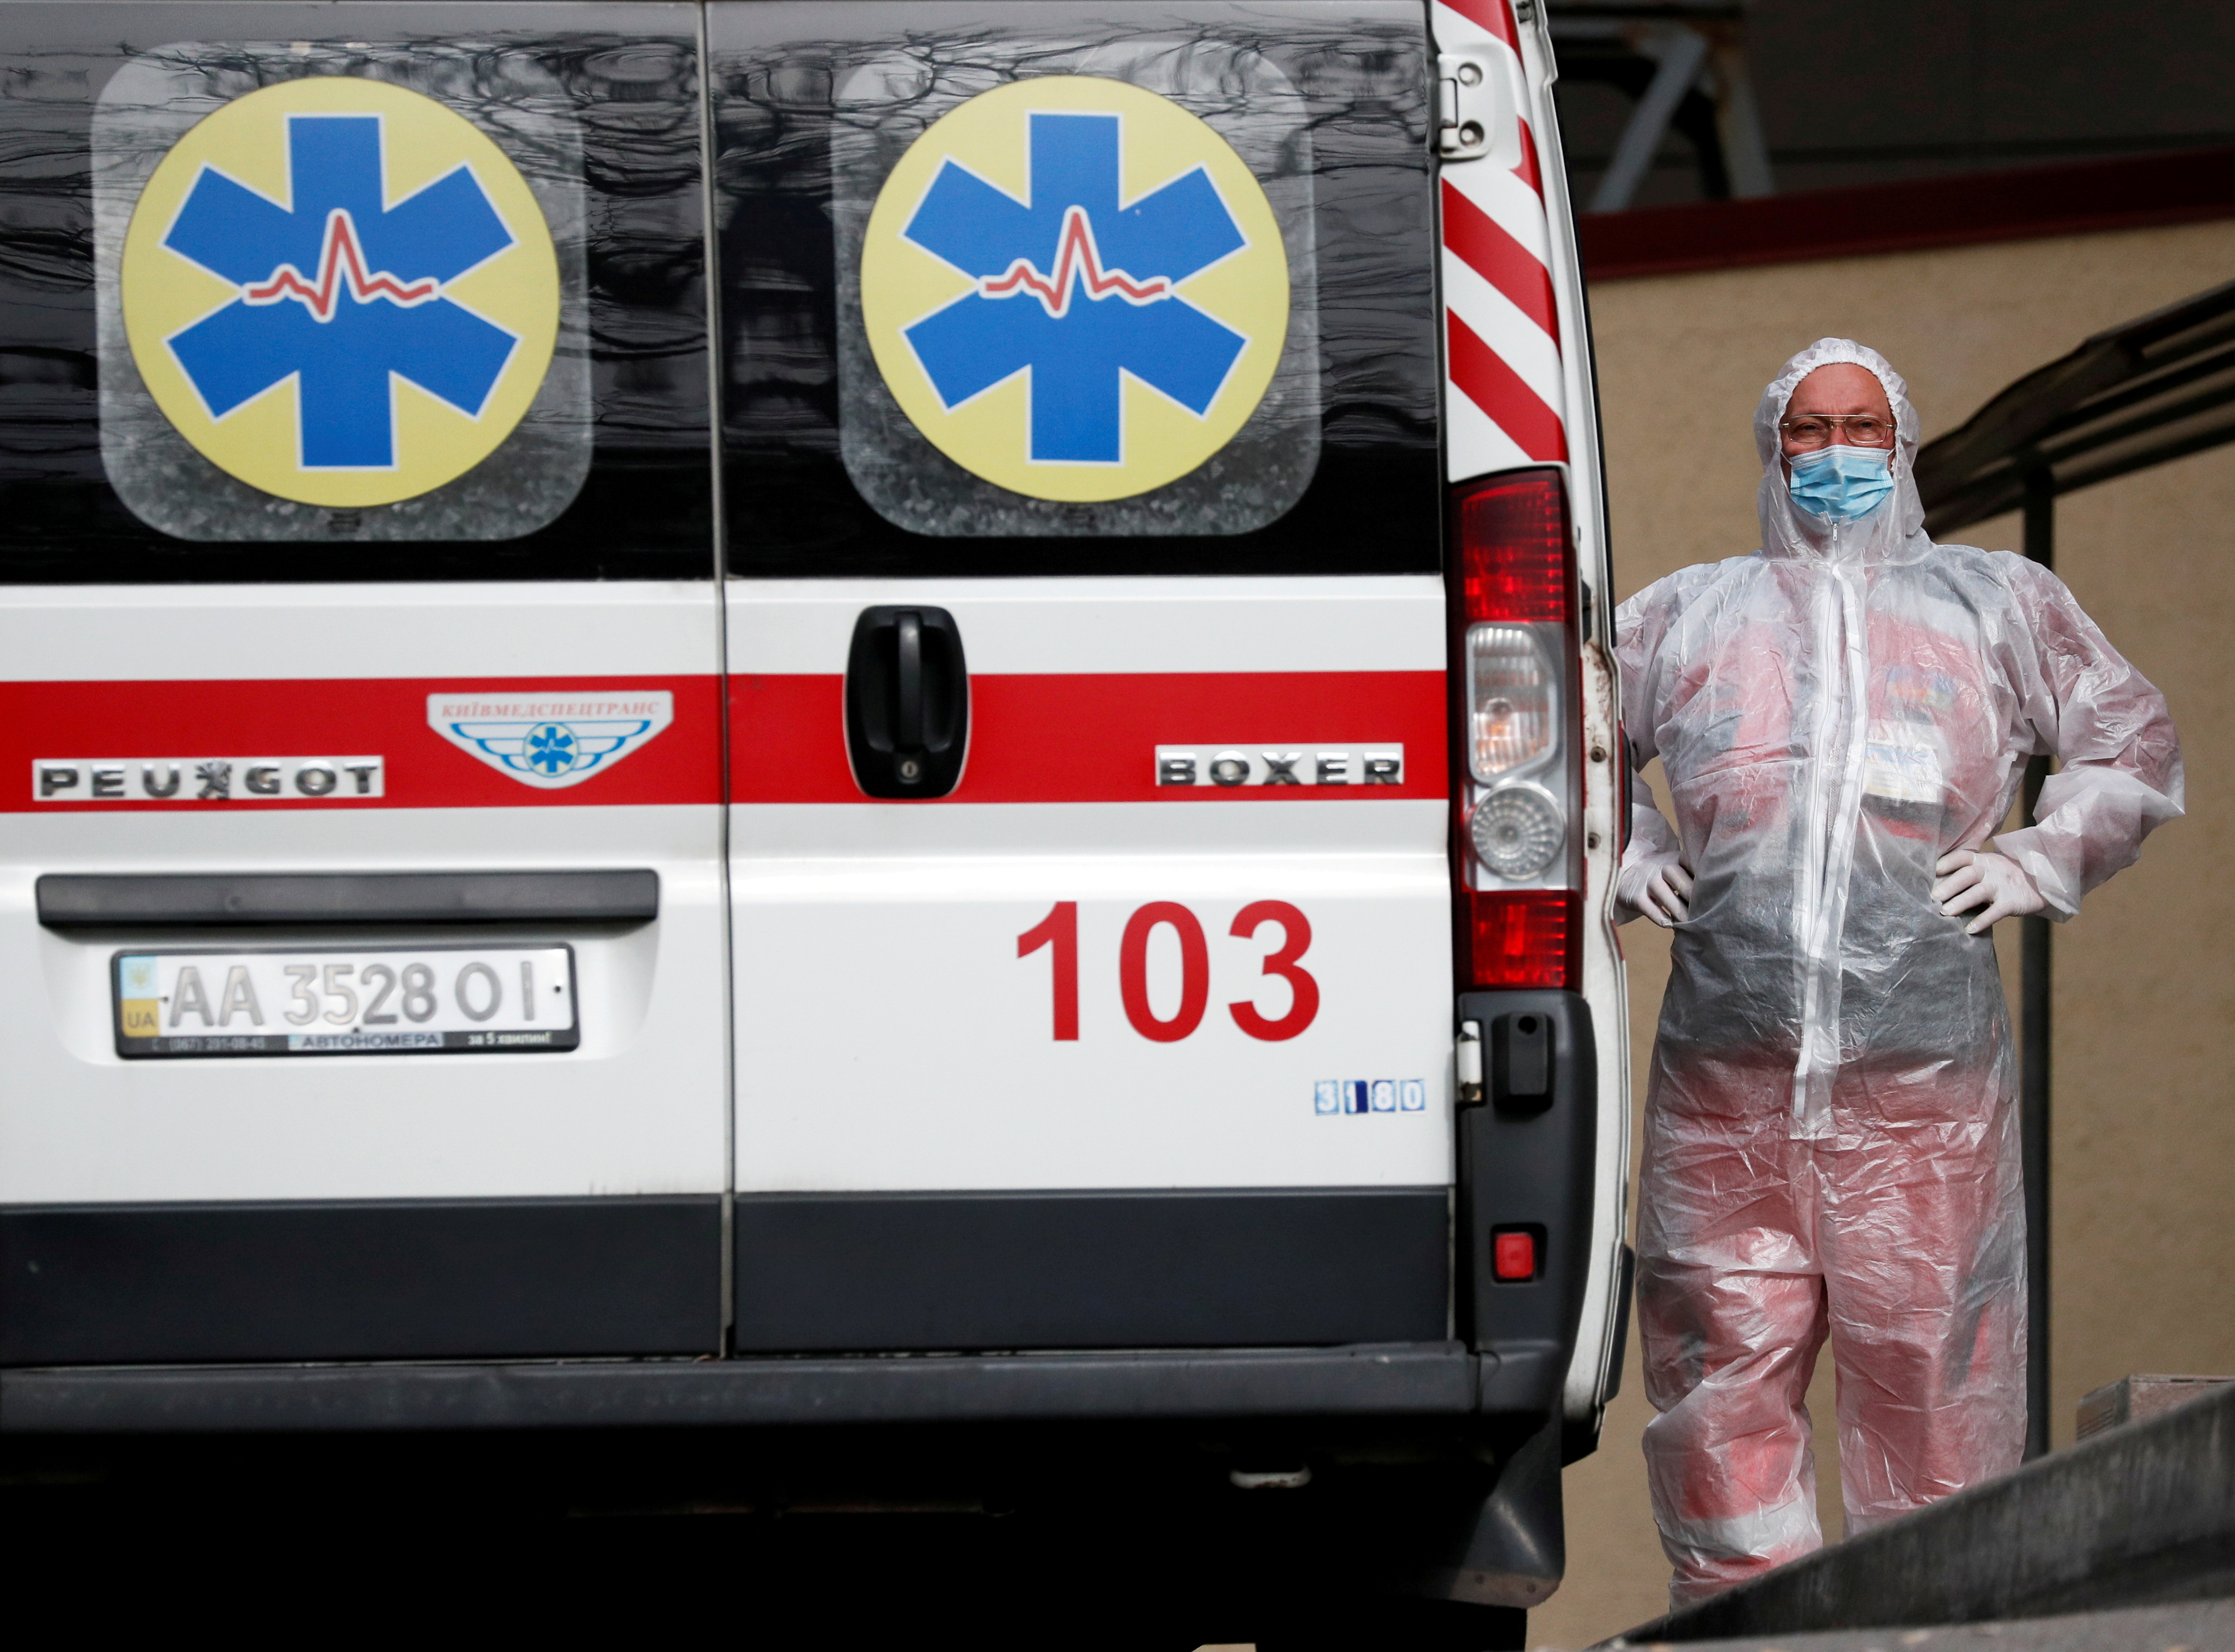 A health worker stands near an ambulance carring a COVID-19 patient, as they wait in the queue at a hospital for people infected with the coronavirus disease in Kyiv, Ukraine October 18, 2021.  REUTERS/Gleb Garanich